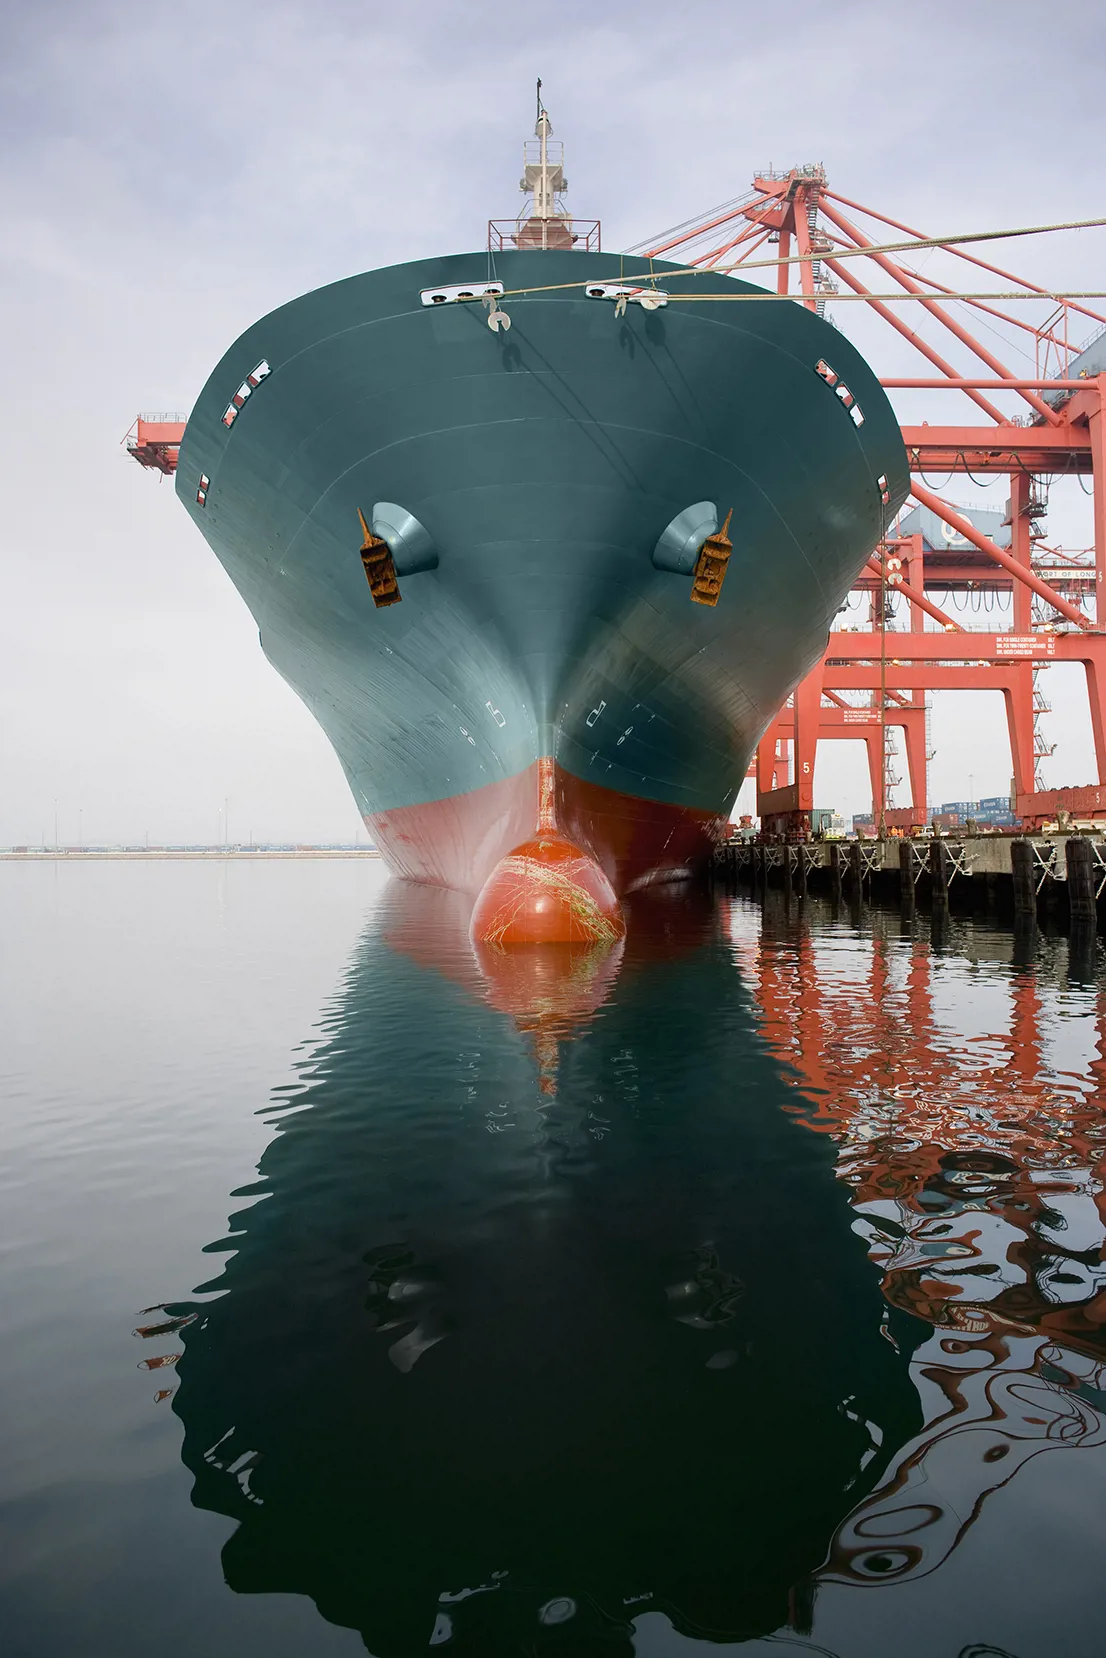 Bow of a red and teal cargo ship